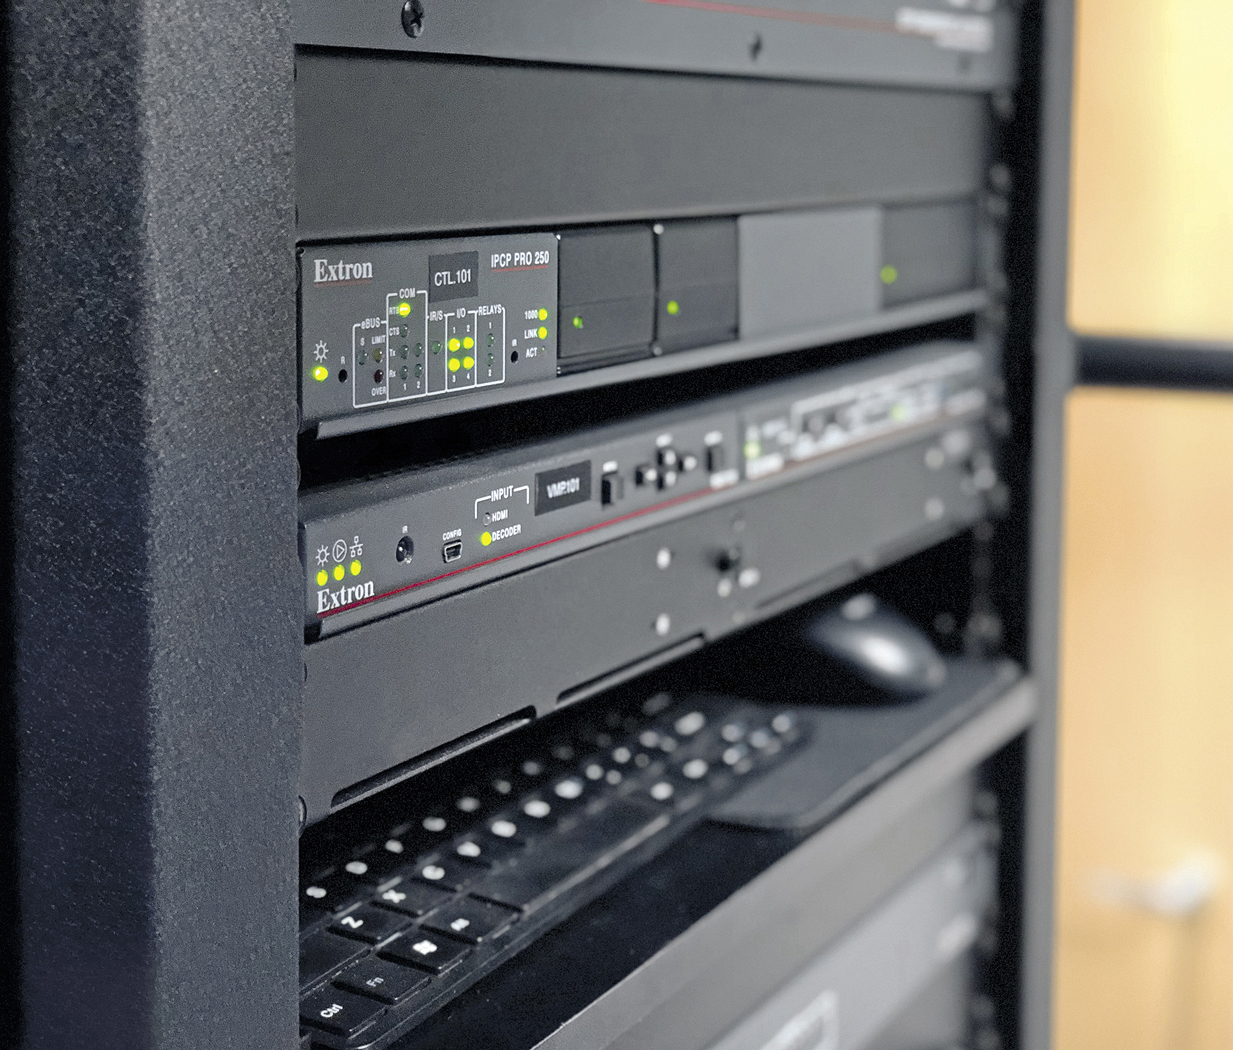 The compact size and energy efficiency of the various Extron products, such as the IPCP Pro 250 control processor and the SMD 202 streaming decoder, allowed the equipment to fit in one master rack.